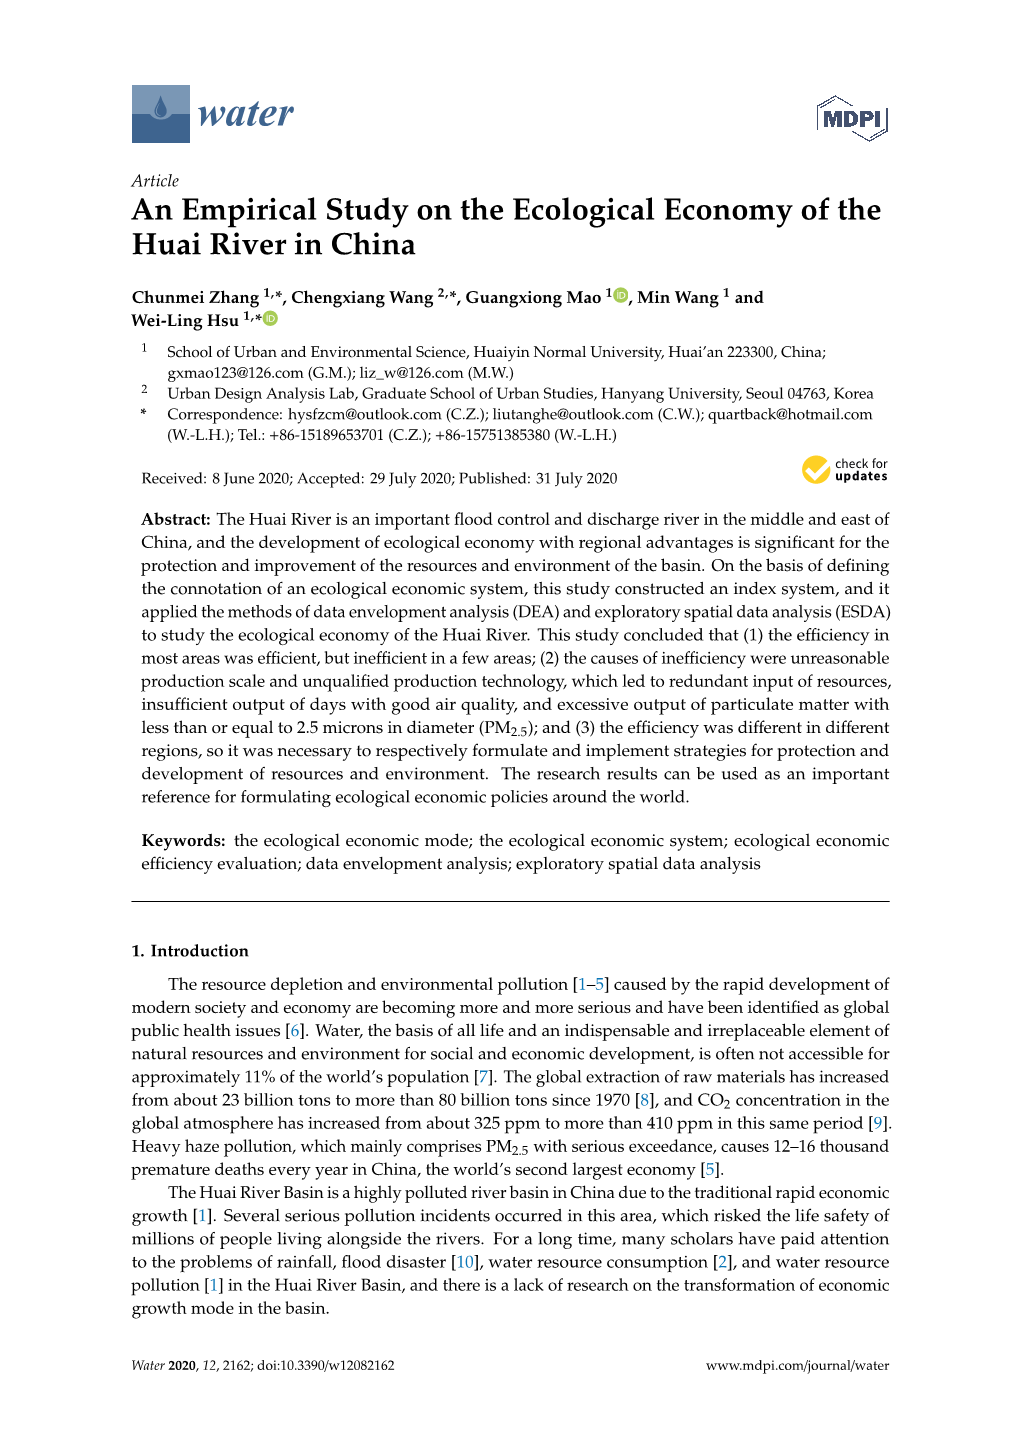 An Empirical Study on the Ecological Economy of the Huai River in China